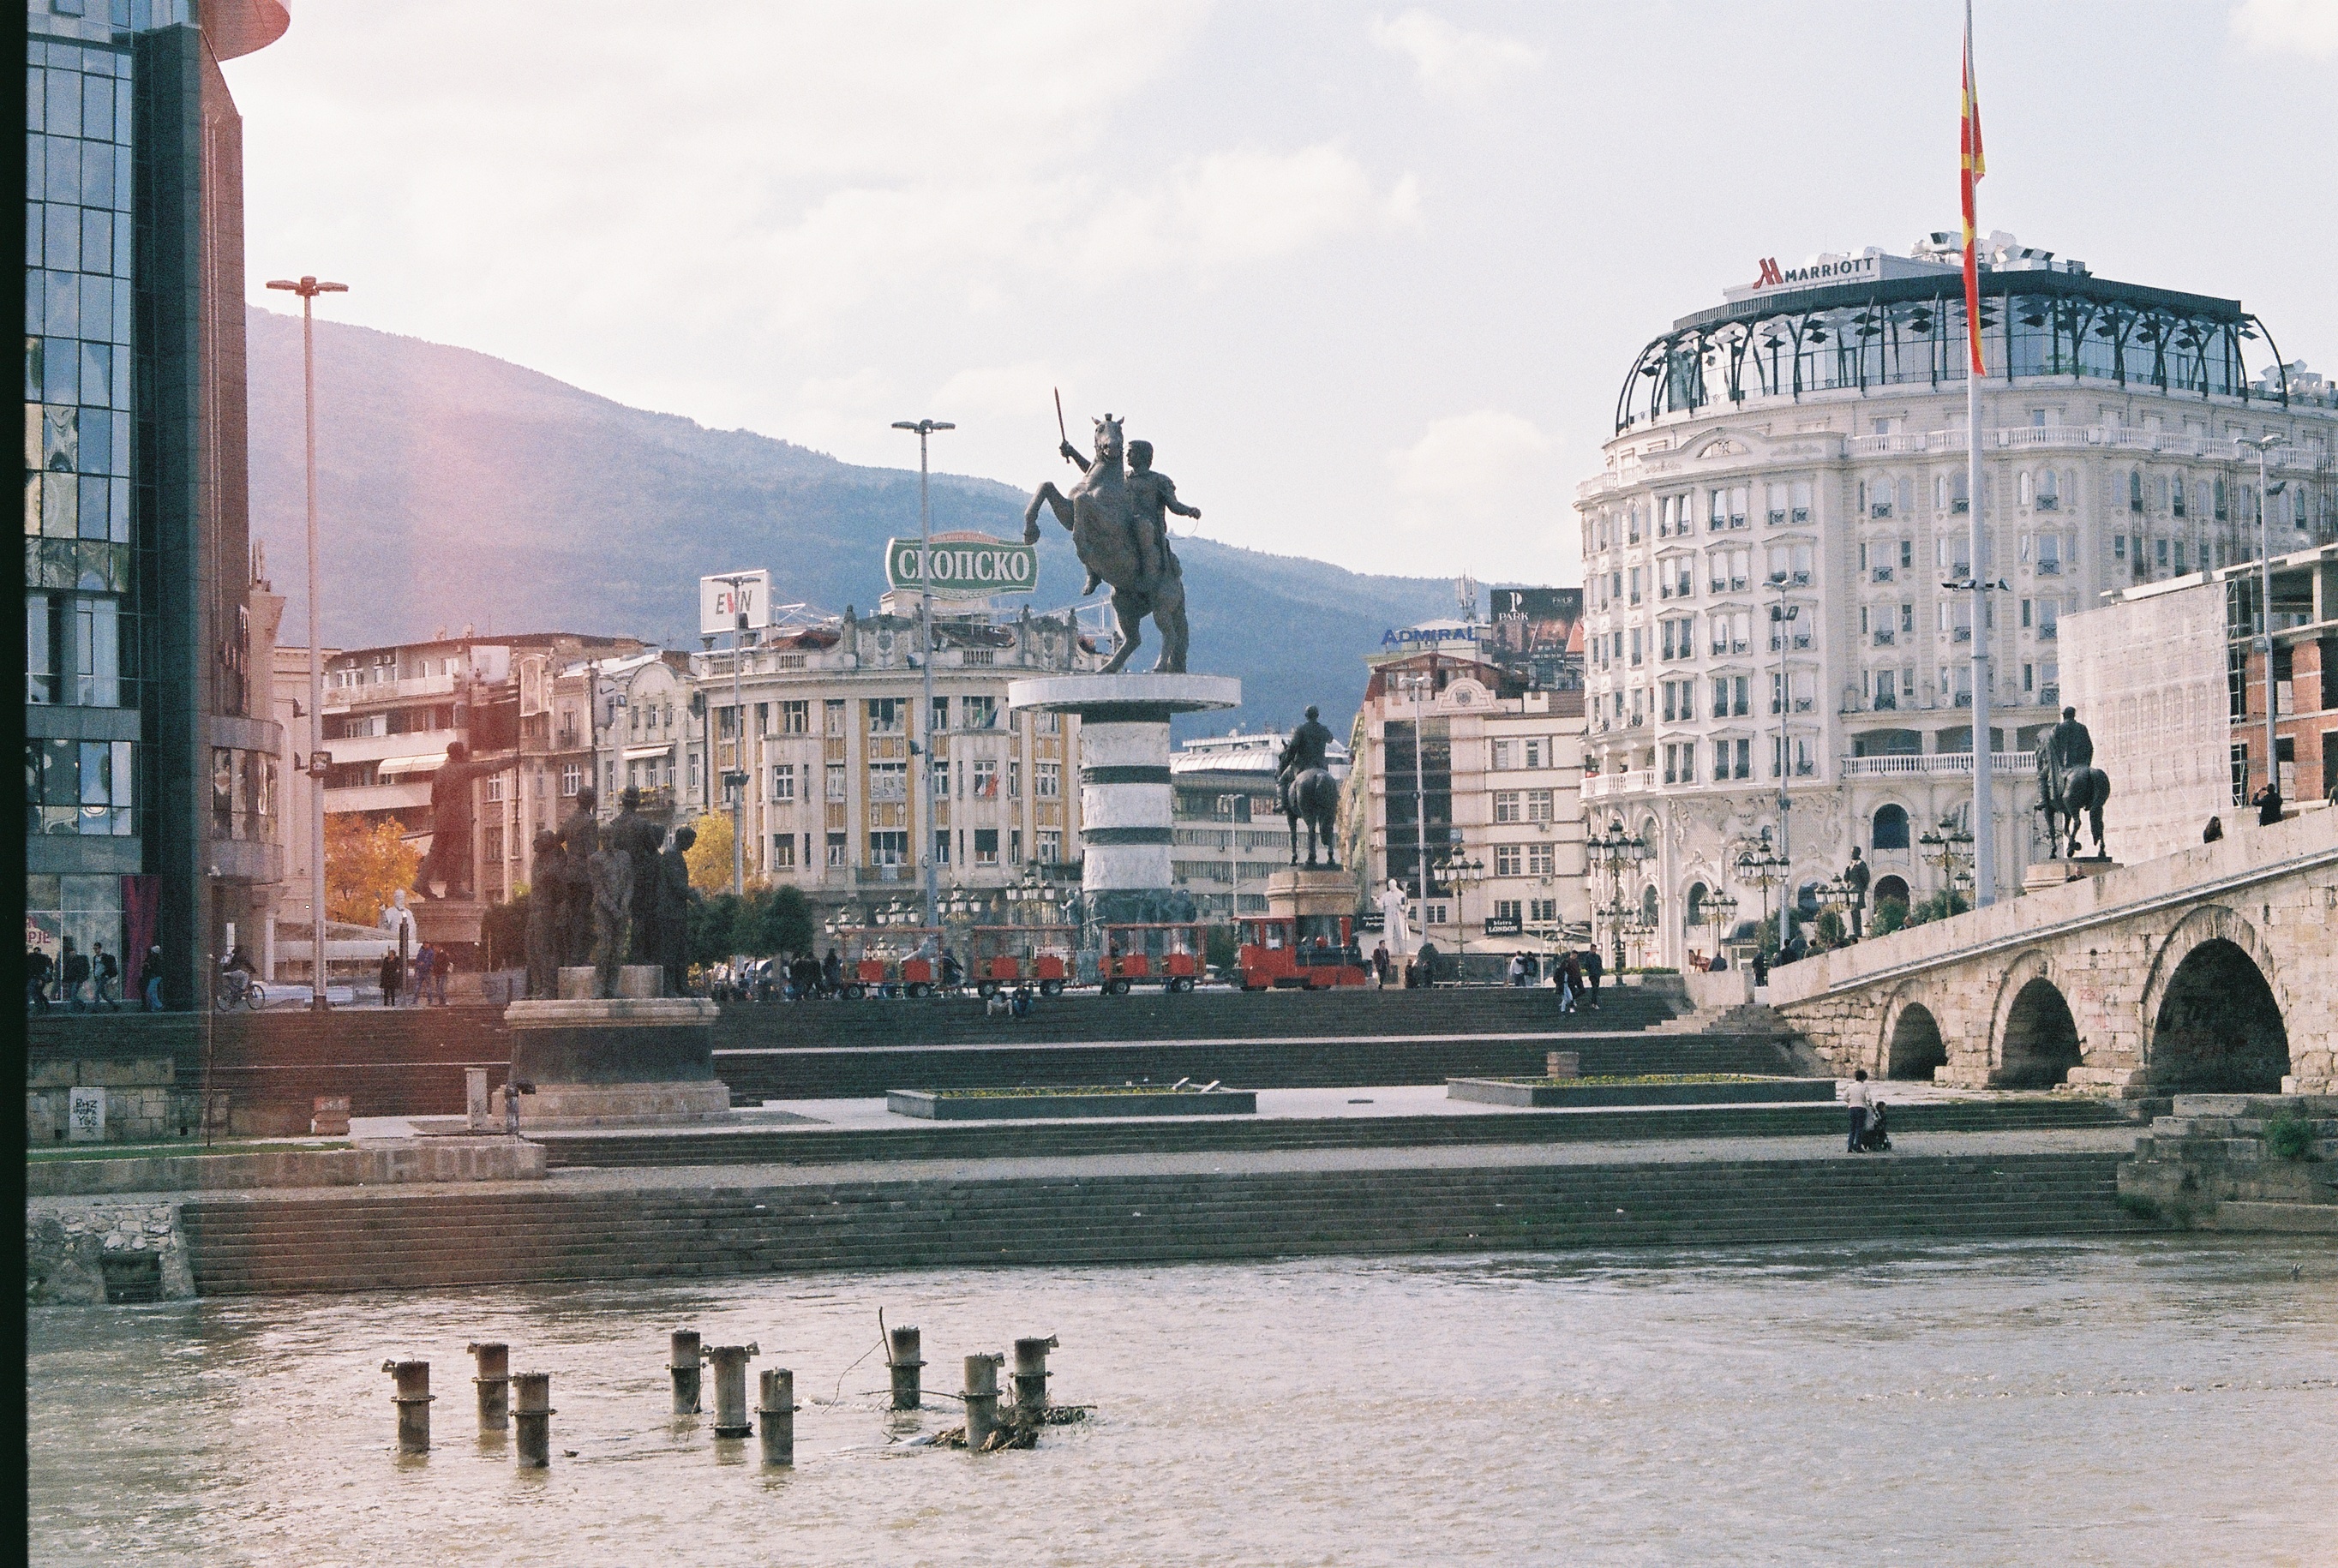 Macedonia Square from the otherside with Alexander the Great statue [Skopje, 2017] by Valentina Orlando